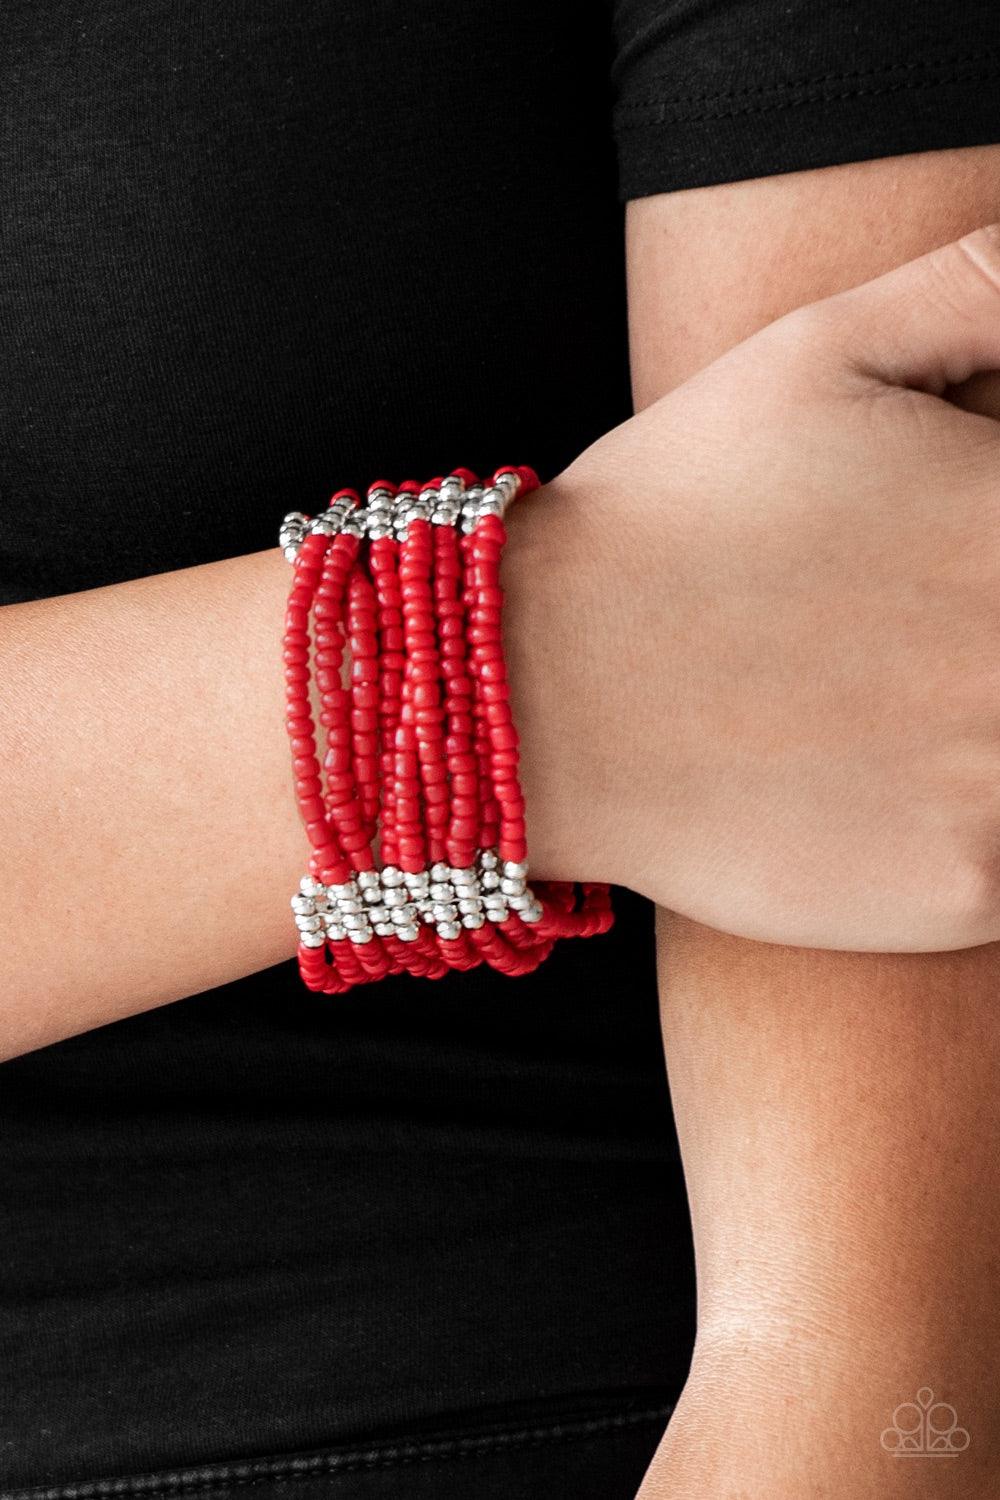 Paparazzi Accessories Outback Odyssey- Red Joined together with metallic fittings, countless red seed beads are threaded along stretchy elastic bands. Sections of dainty silver beads are sprinkled along the colorful layers, adding hints of shimmer to the